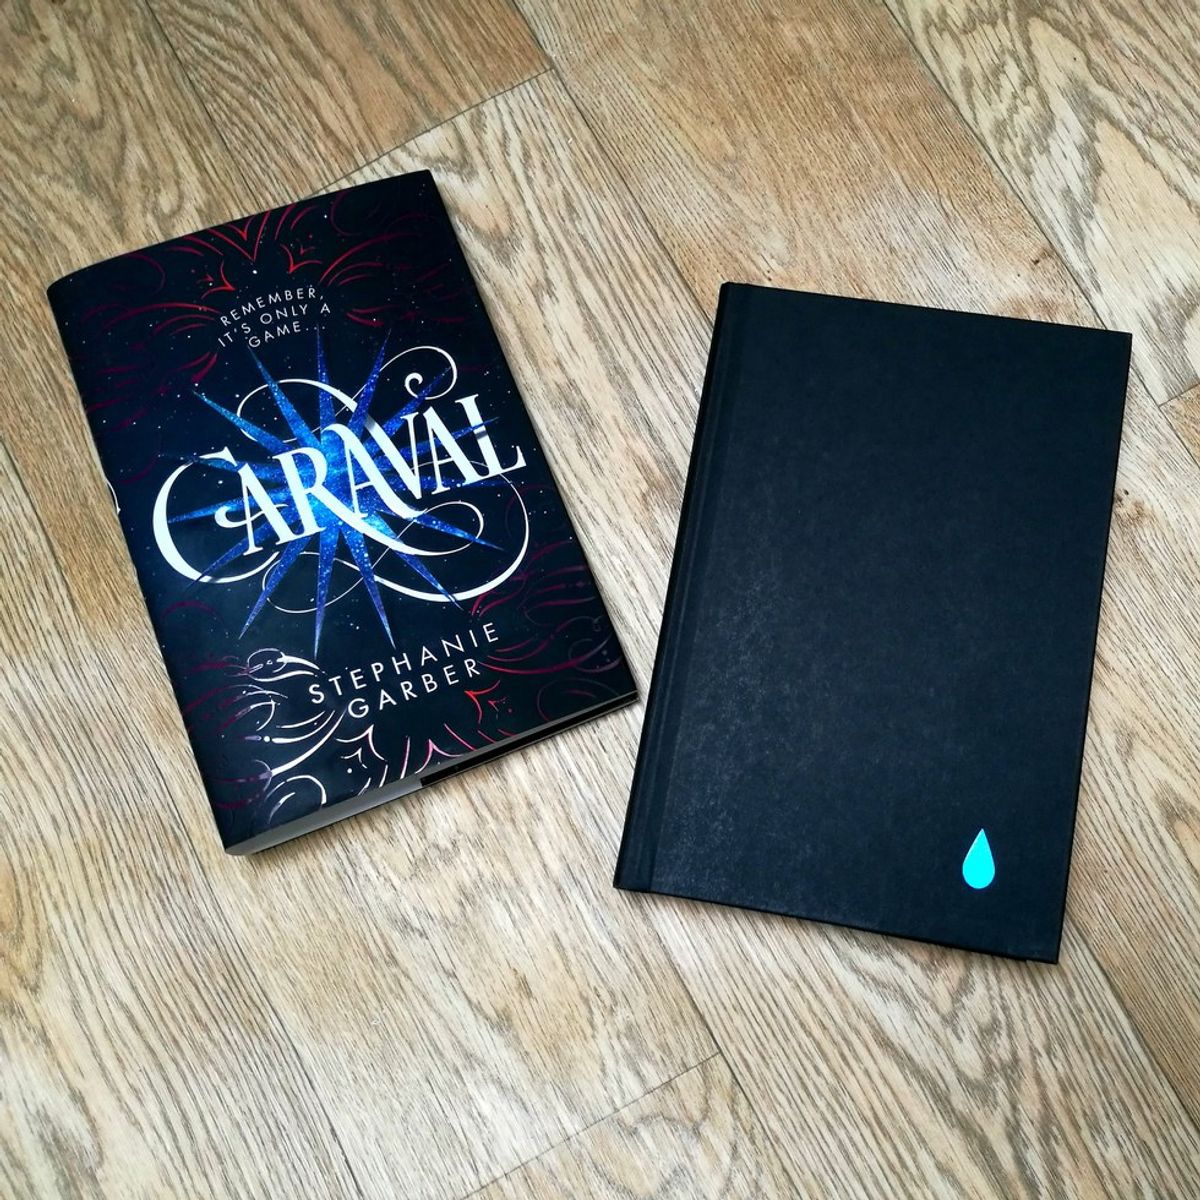 Review Of Caraval By Stephanie Garber